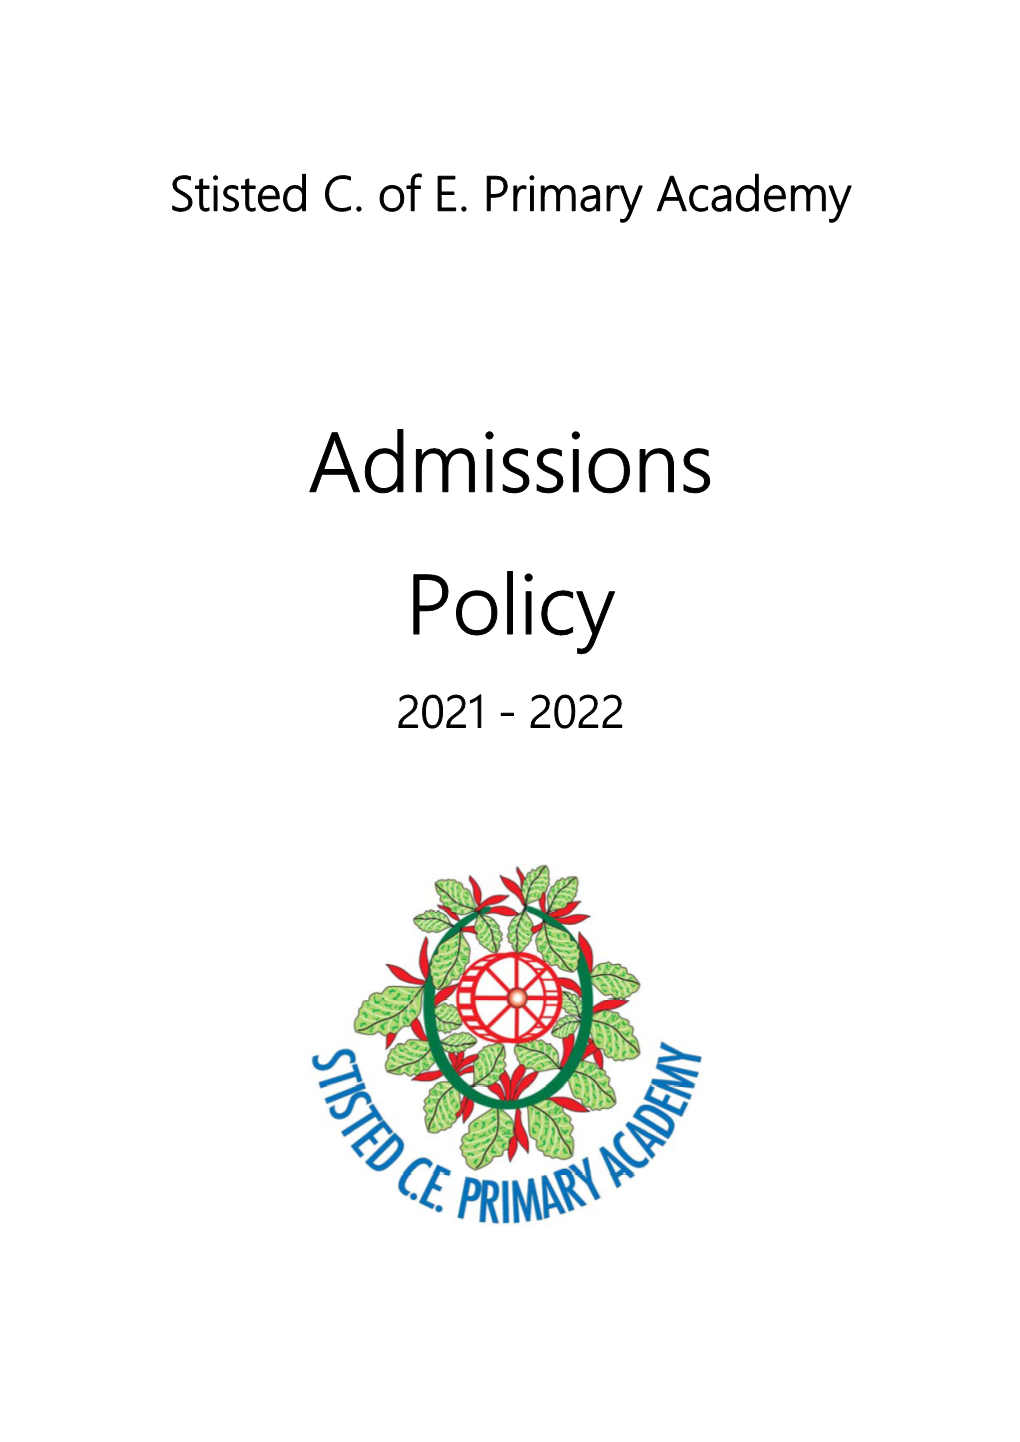 Admissions Policy 2021 - 2022